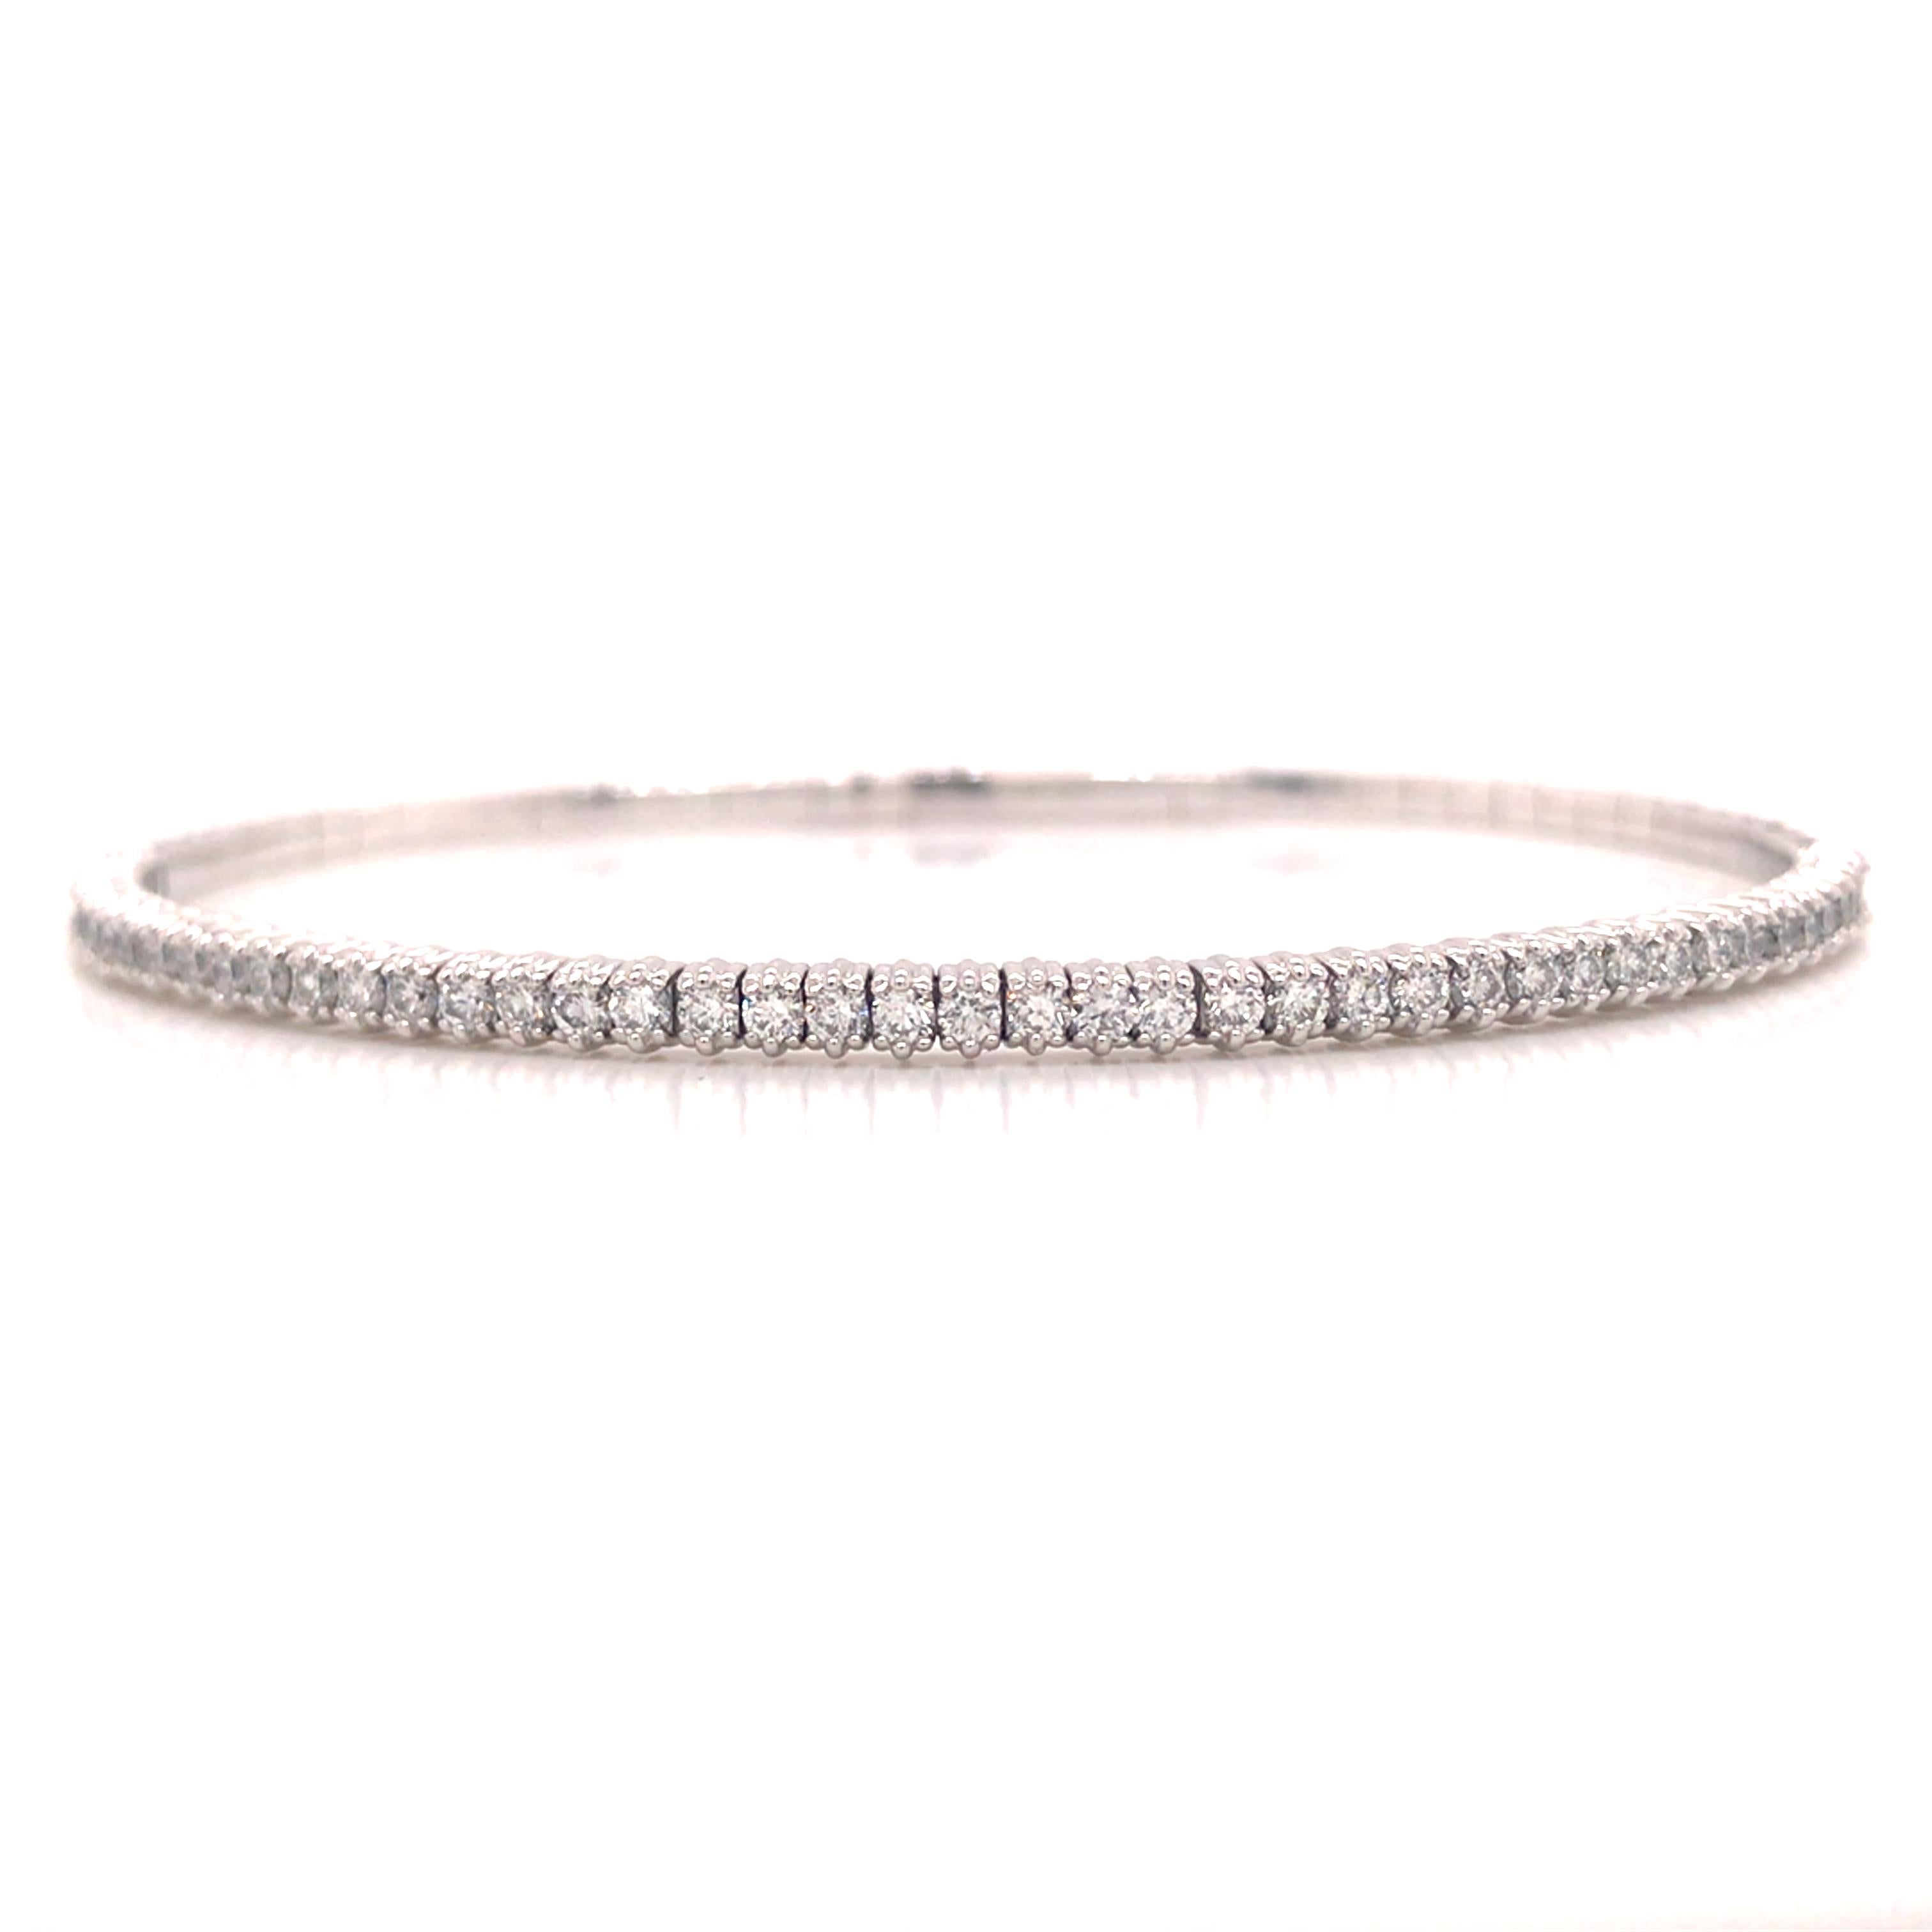 Diamond Flexible Bangle Bracelet in 14K White Gold.  Round Brilliant Cut Diamonds weighing 1.0 carat total weight, G-H in color and VS-SI in clarity are expertly set. The Bangle measures 6 1/2 inch and 1/8 inch in width.  6.98 grams.